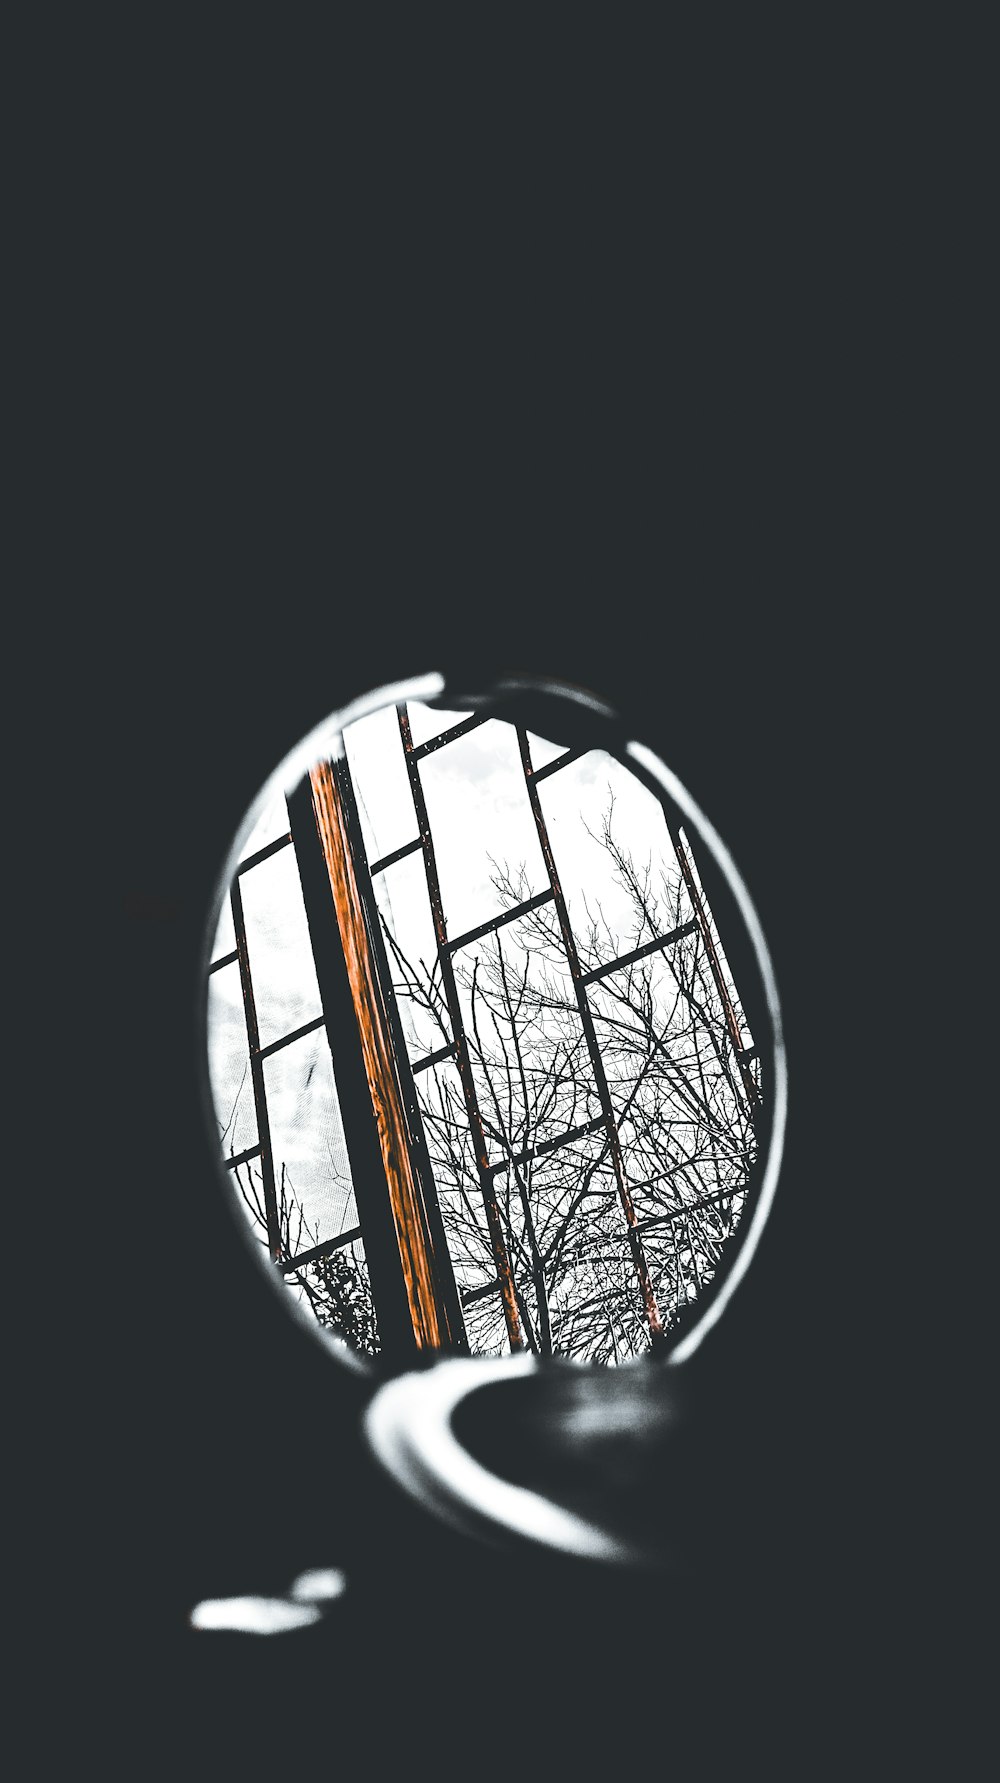 a mirror with a reflection of trees in it